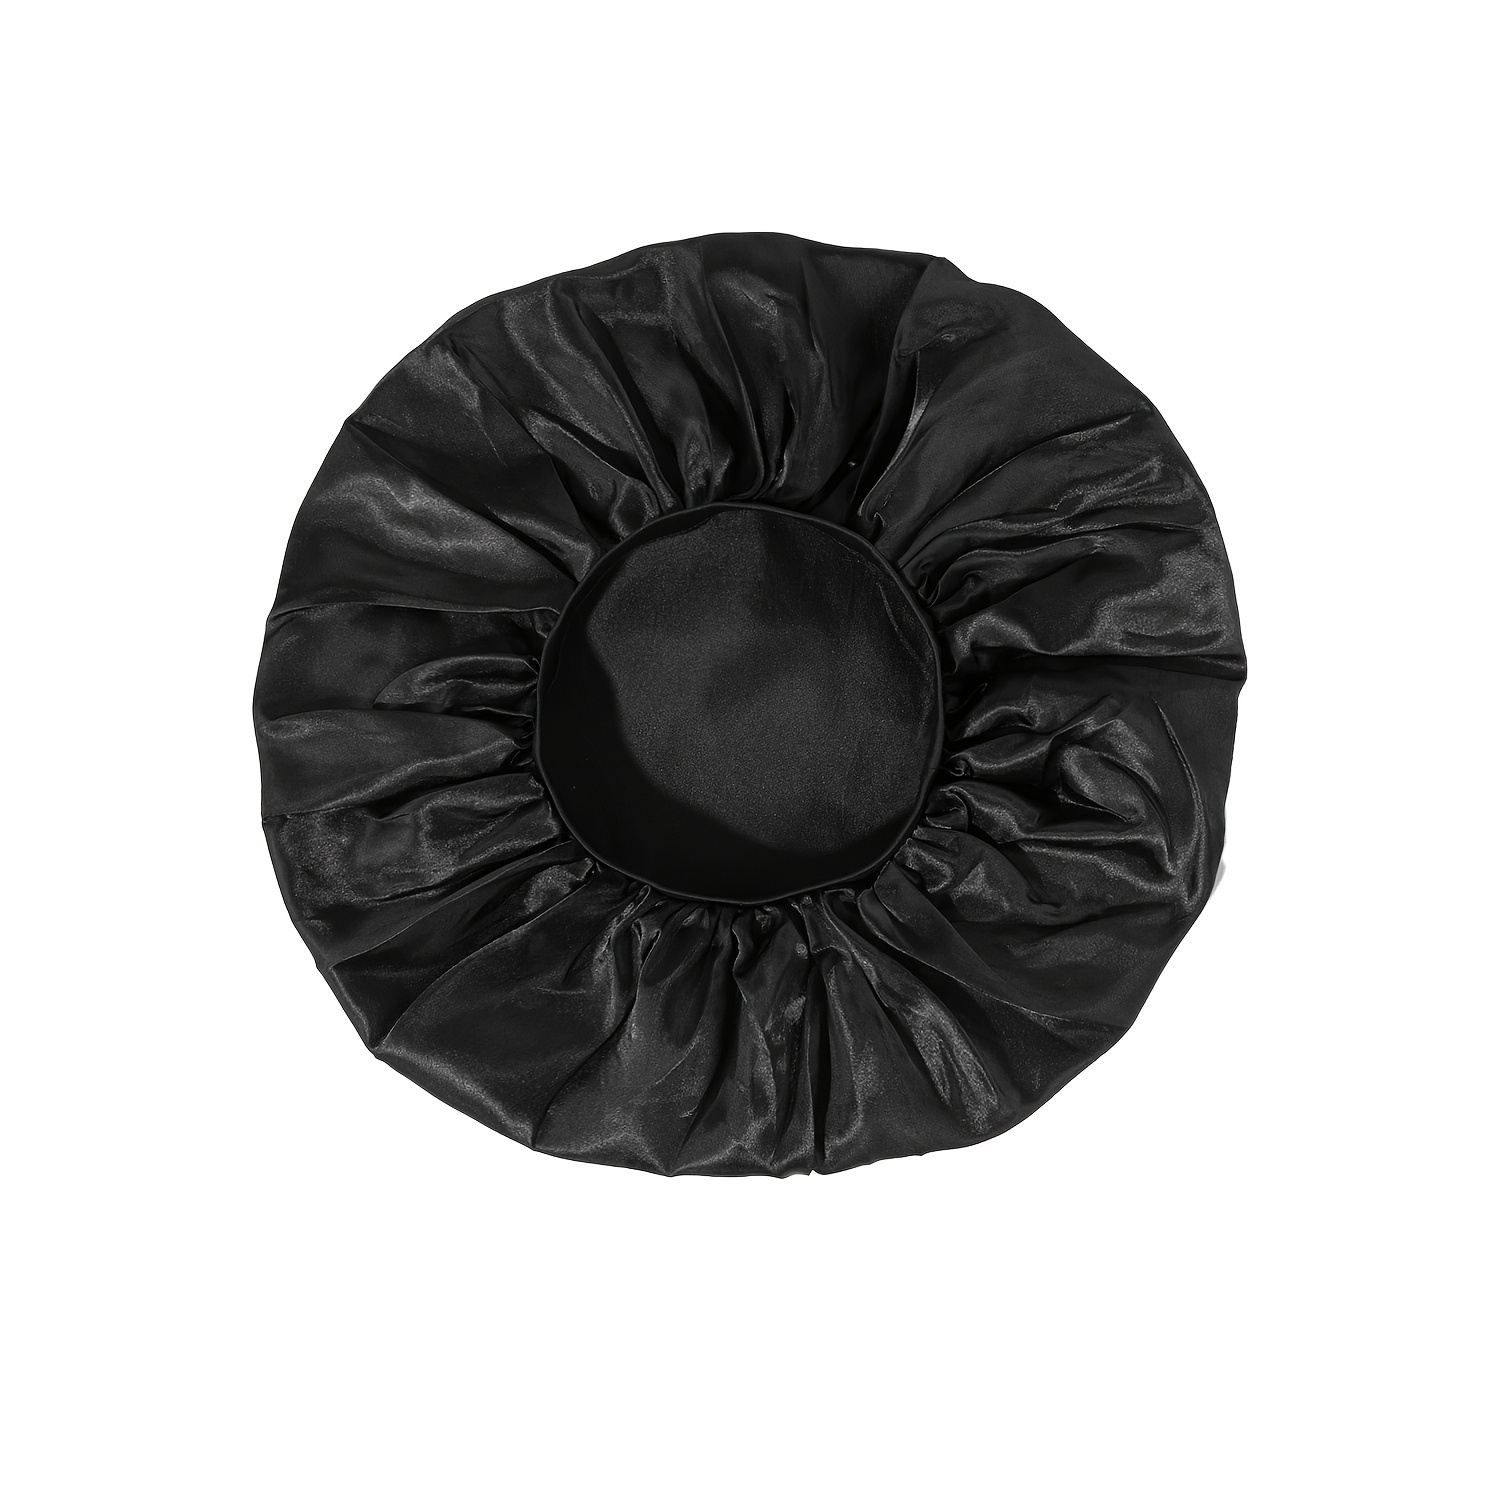 Satin Bonnet Women Large Size Curly Long Hair Protects Hair